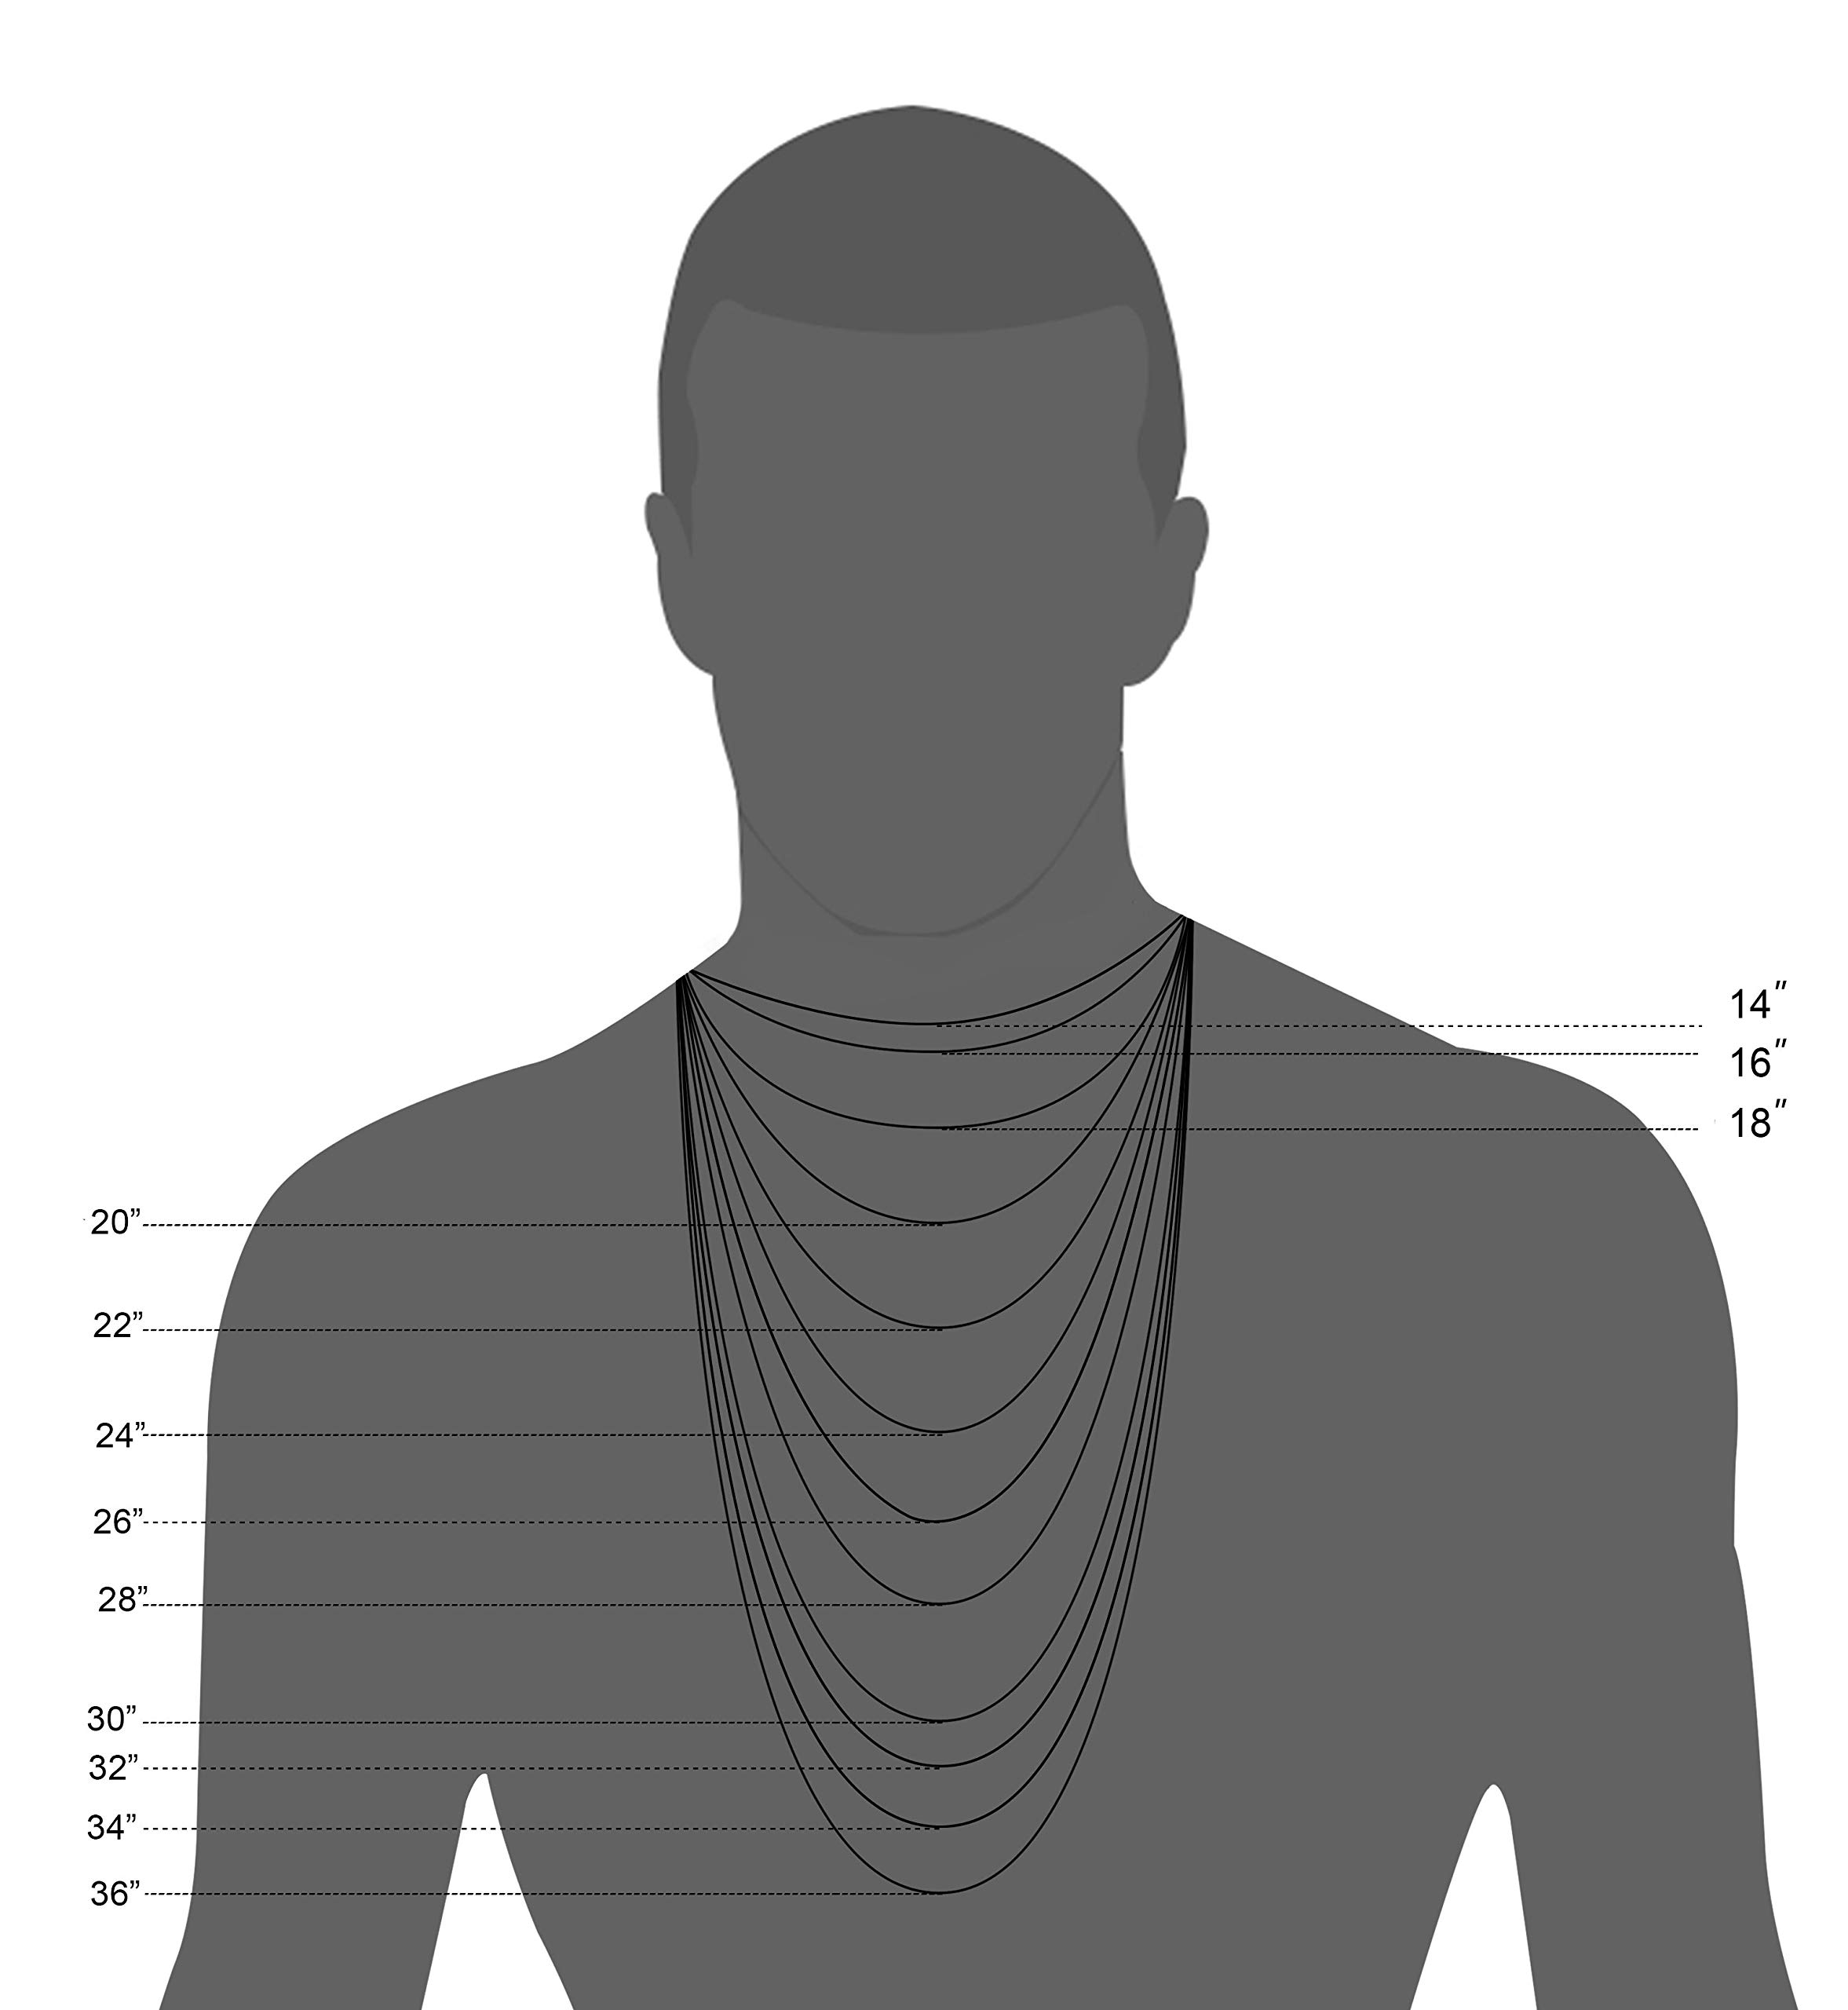 Jstyle 3.5mm Cuban Link Chain Necklace for Mens Boys Women Black Silver Gold Tone Chains for Men Available in 16/18/20/22/24/30 inch Chain